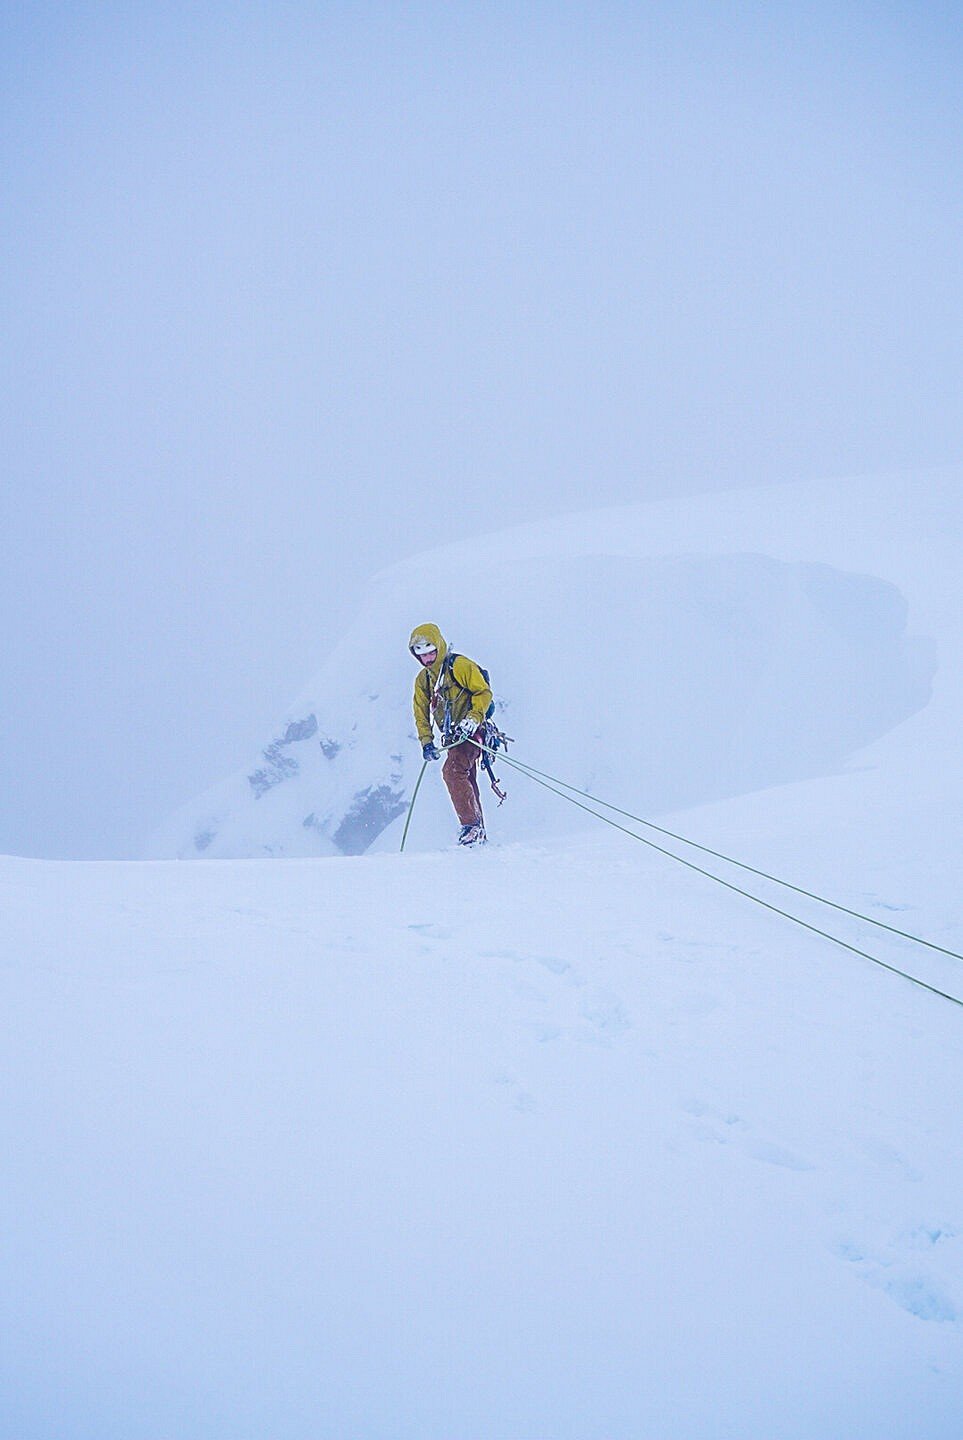 Dropping in on G4
First ones of day to descend Number four gully. Best play it safe.  © Cpdooley